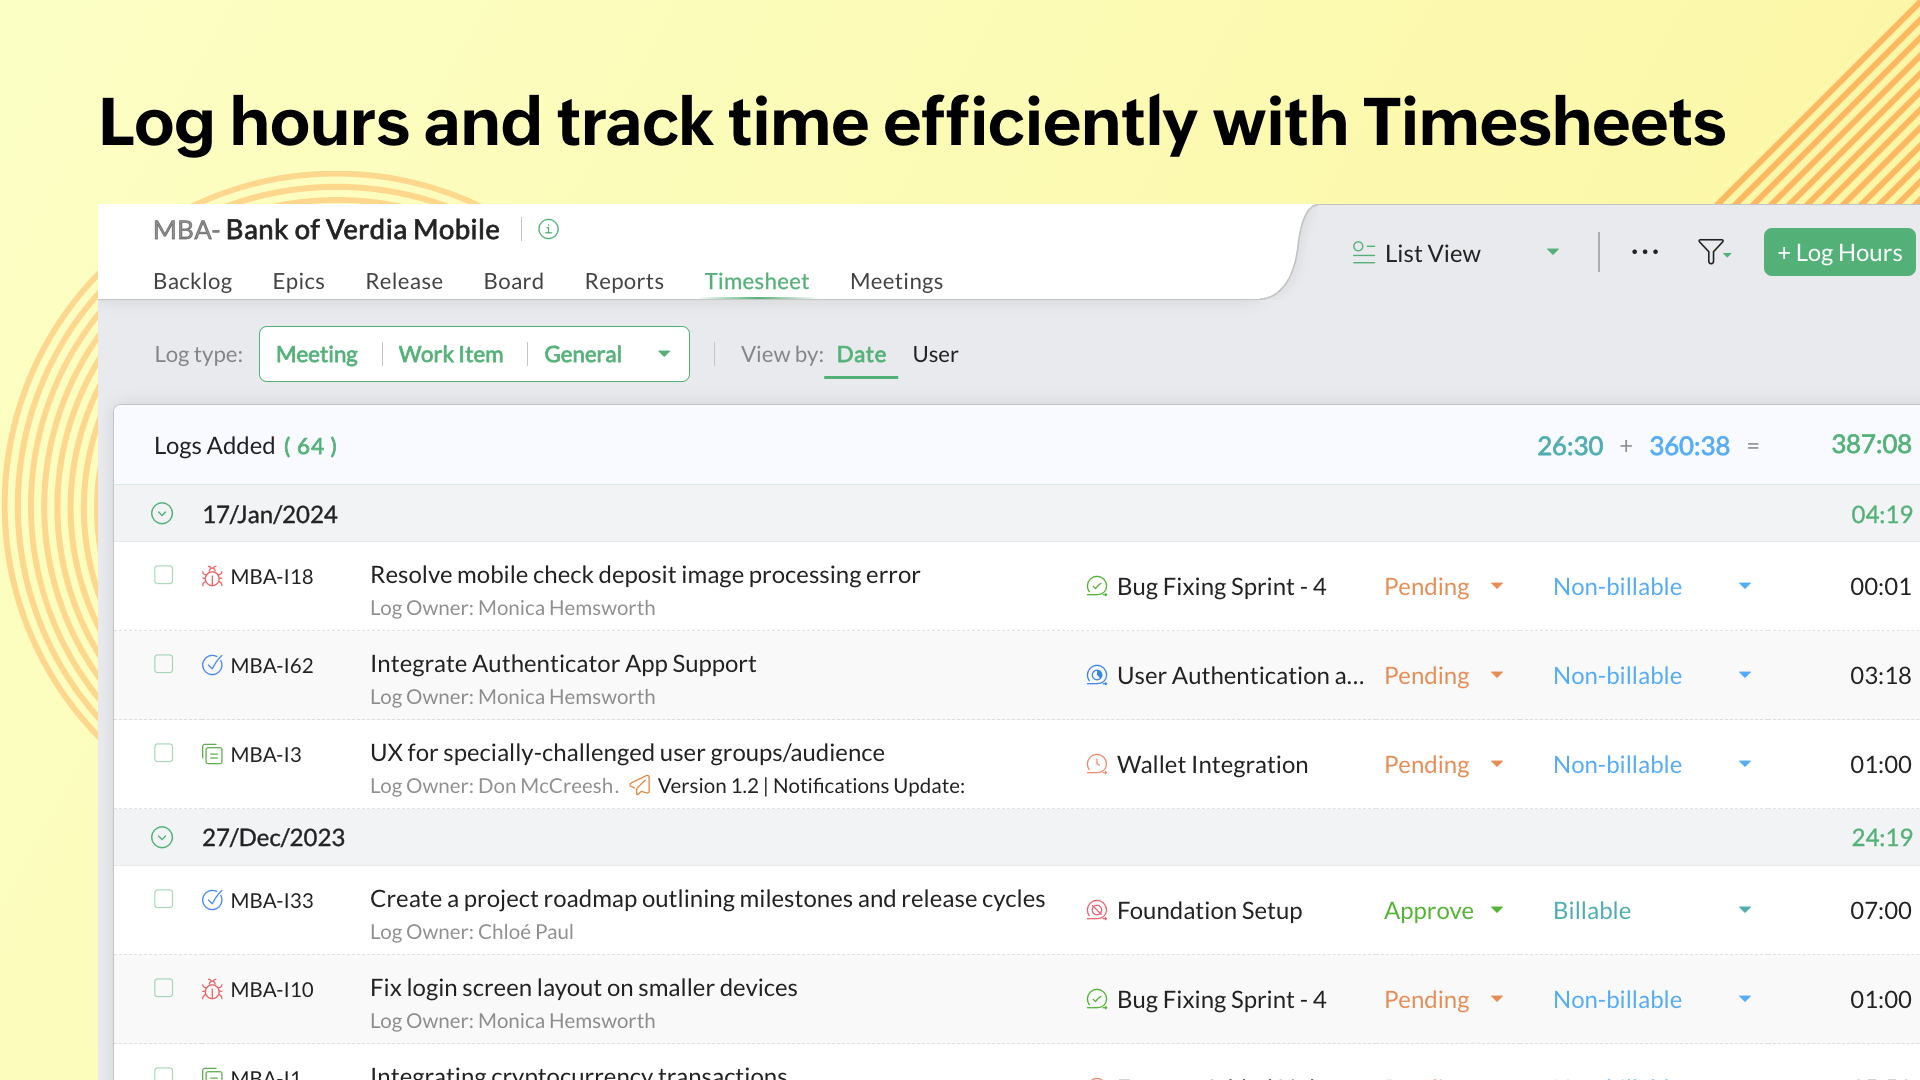 Log hours and track time efficiently with Timesheets 